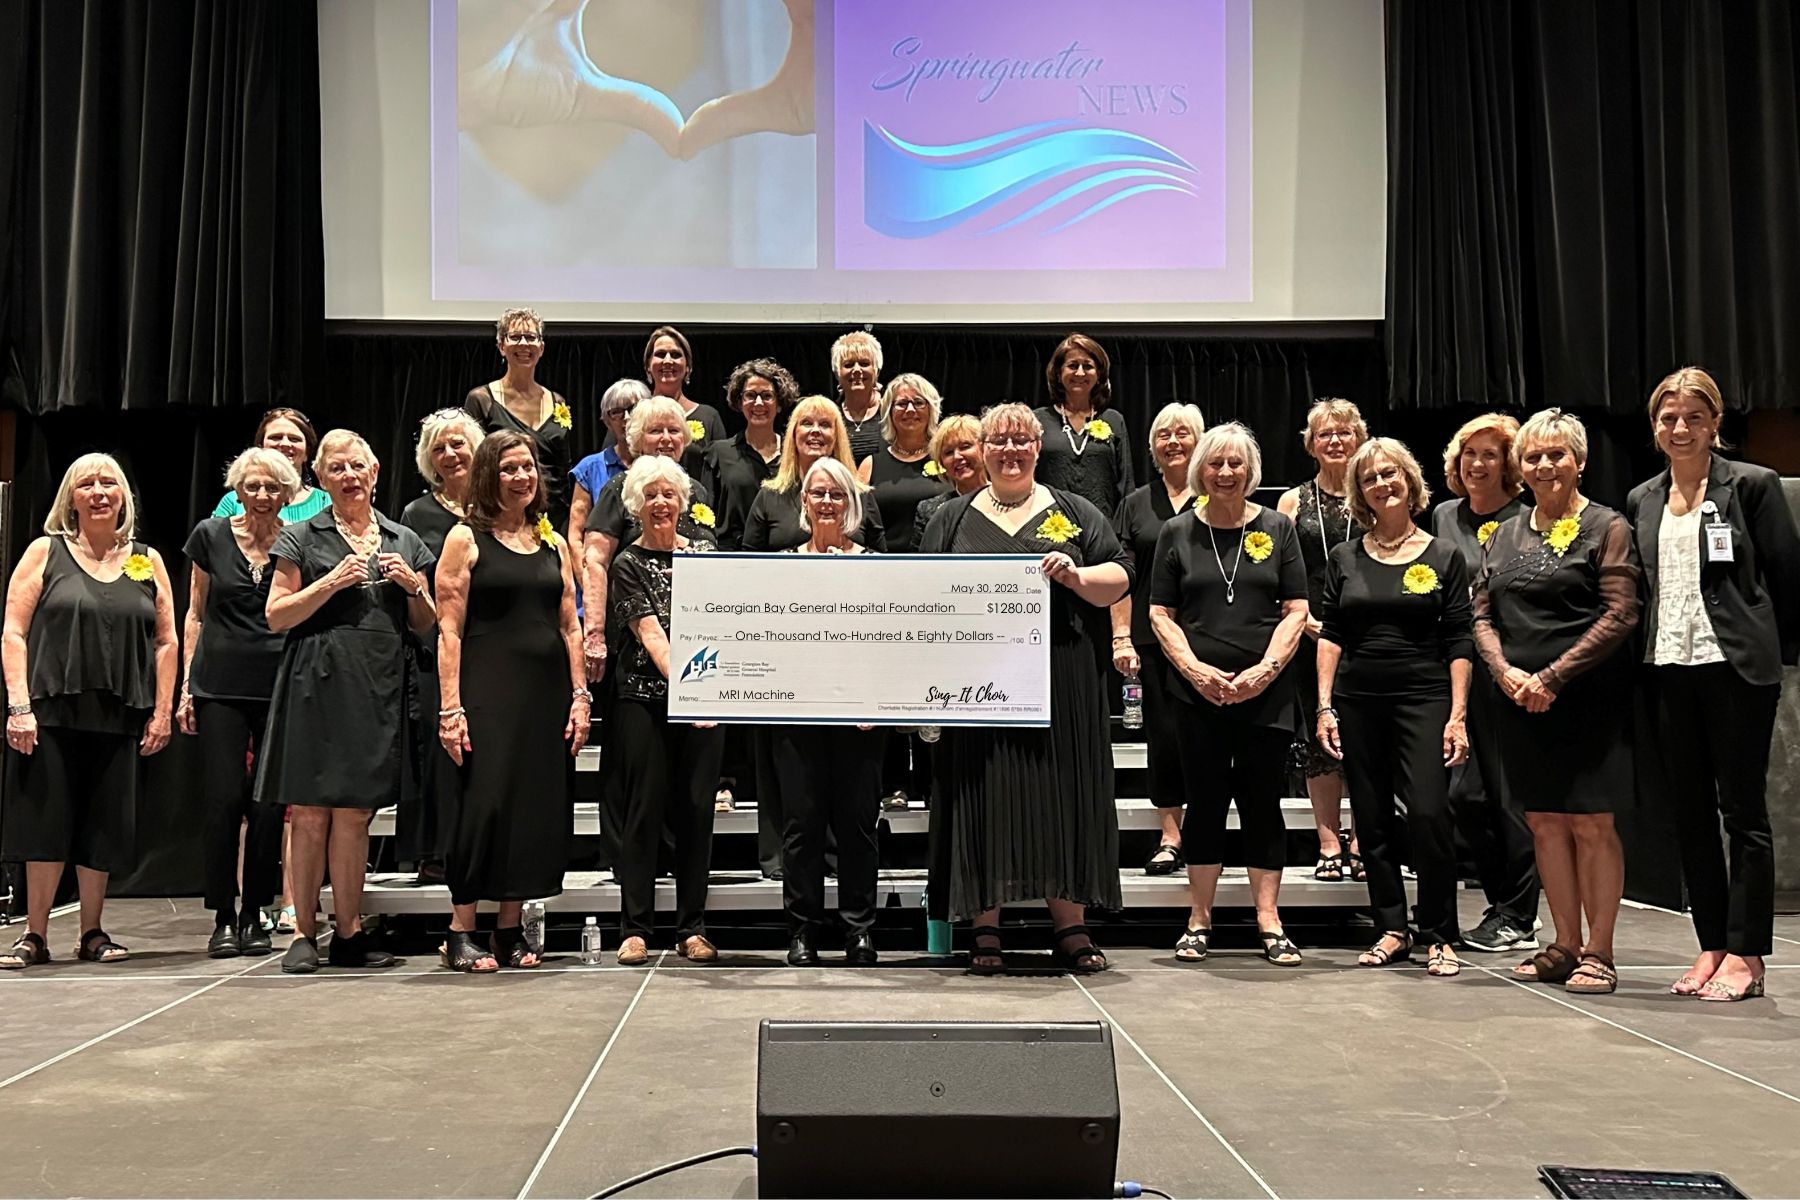 Twenty-four women in black clothing hold a cheque made out to the GBGH Foundation MRI Machine Fund for $1,280.00 from Sing-It choir.